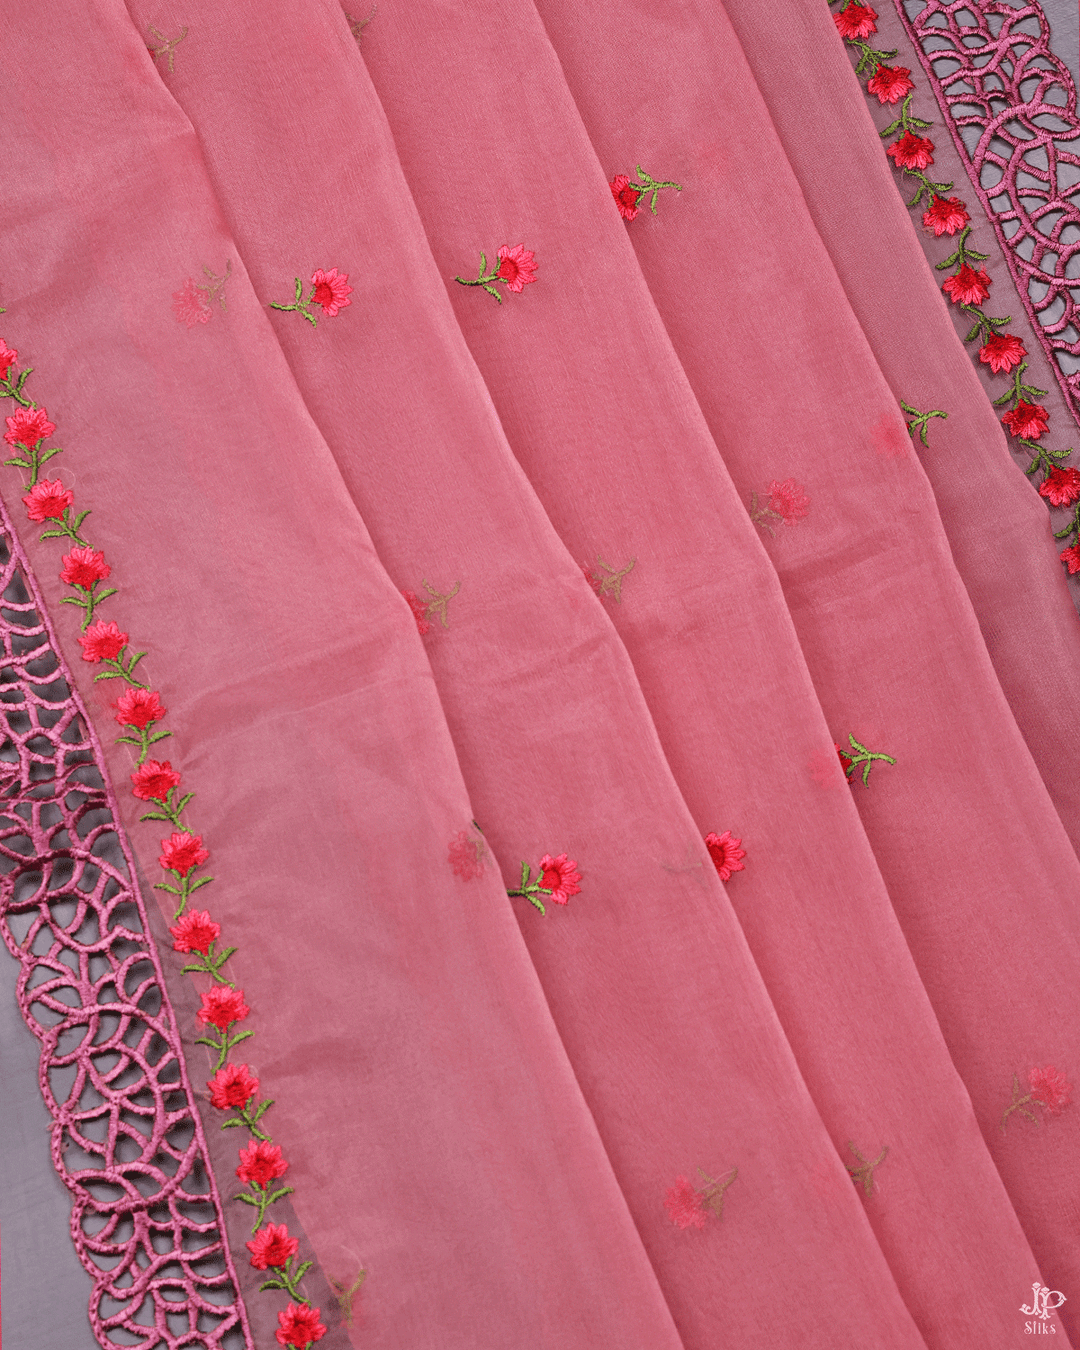 Rose Pink Unstitched Chudidhar Material - C4243 - View 4